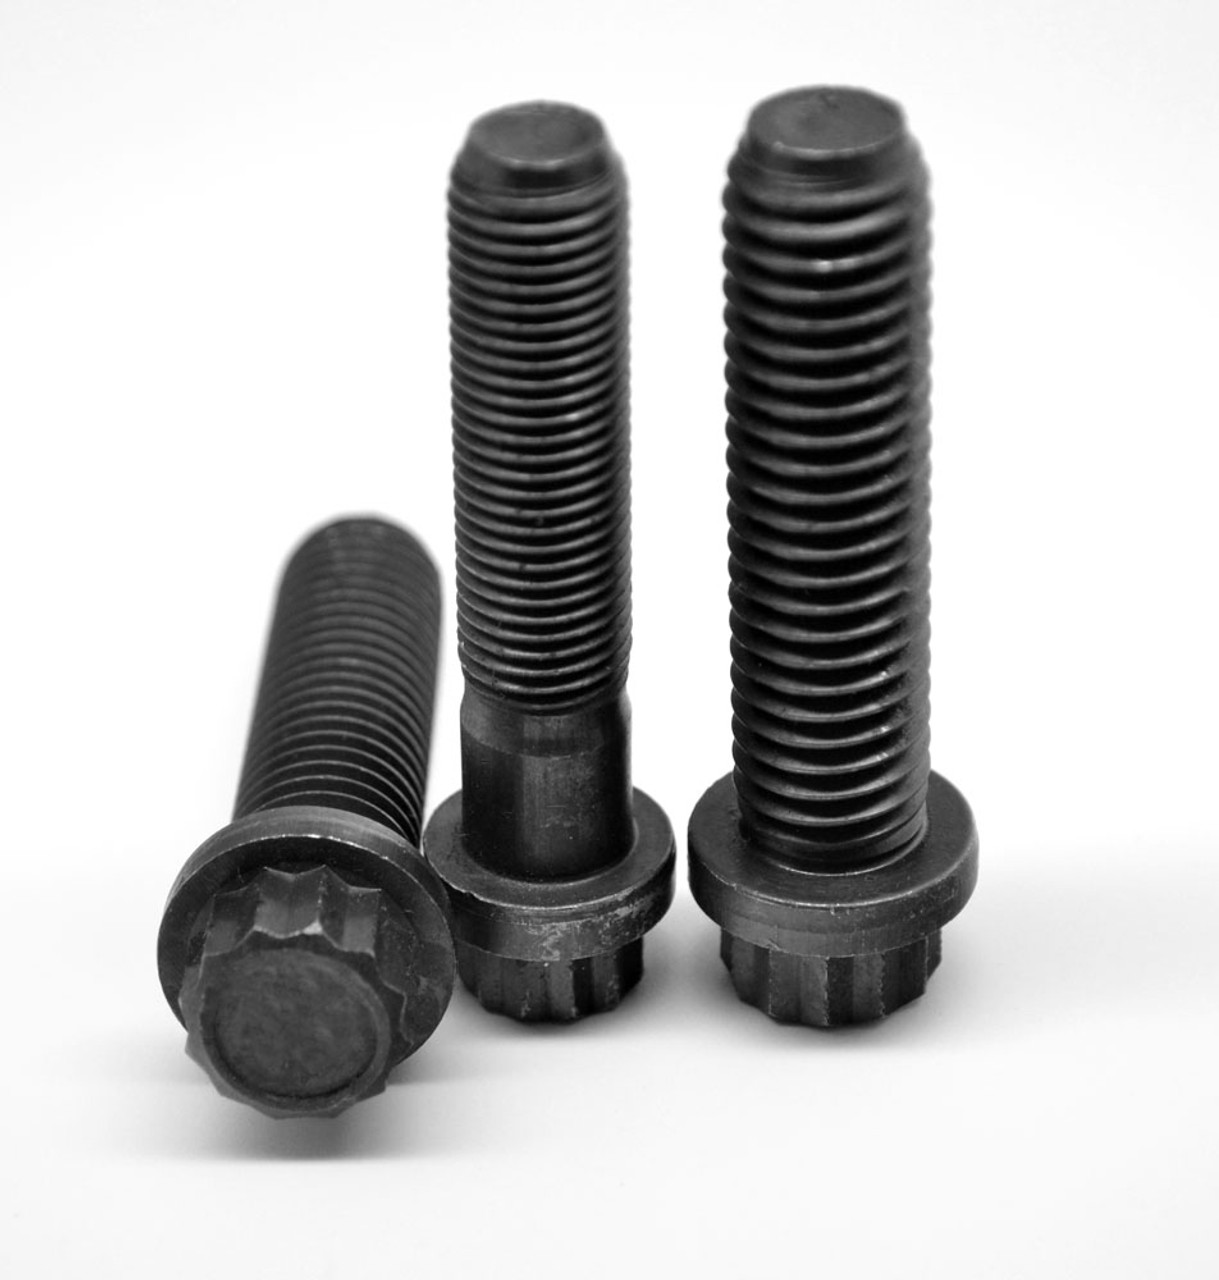 5/16-18 x 7/8 Coarse Thread 12-Point Flange Screw Alloy Steel Thermal Black Oxide